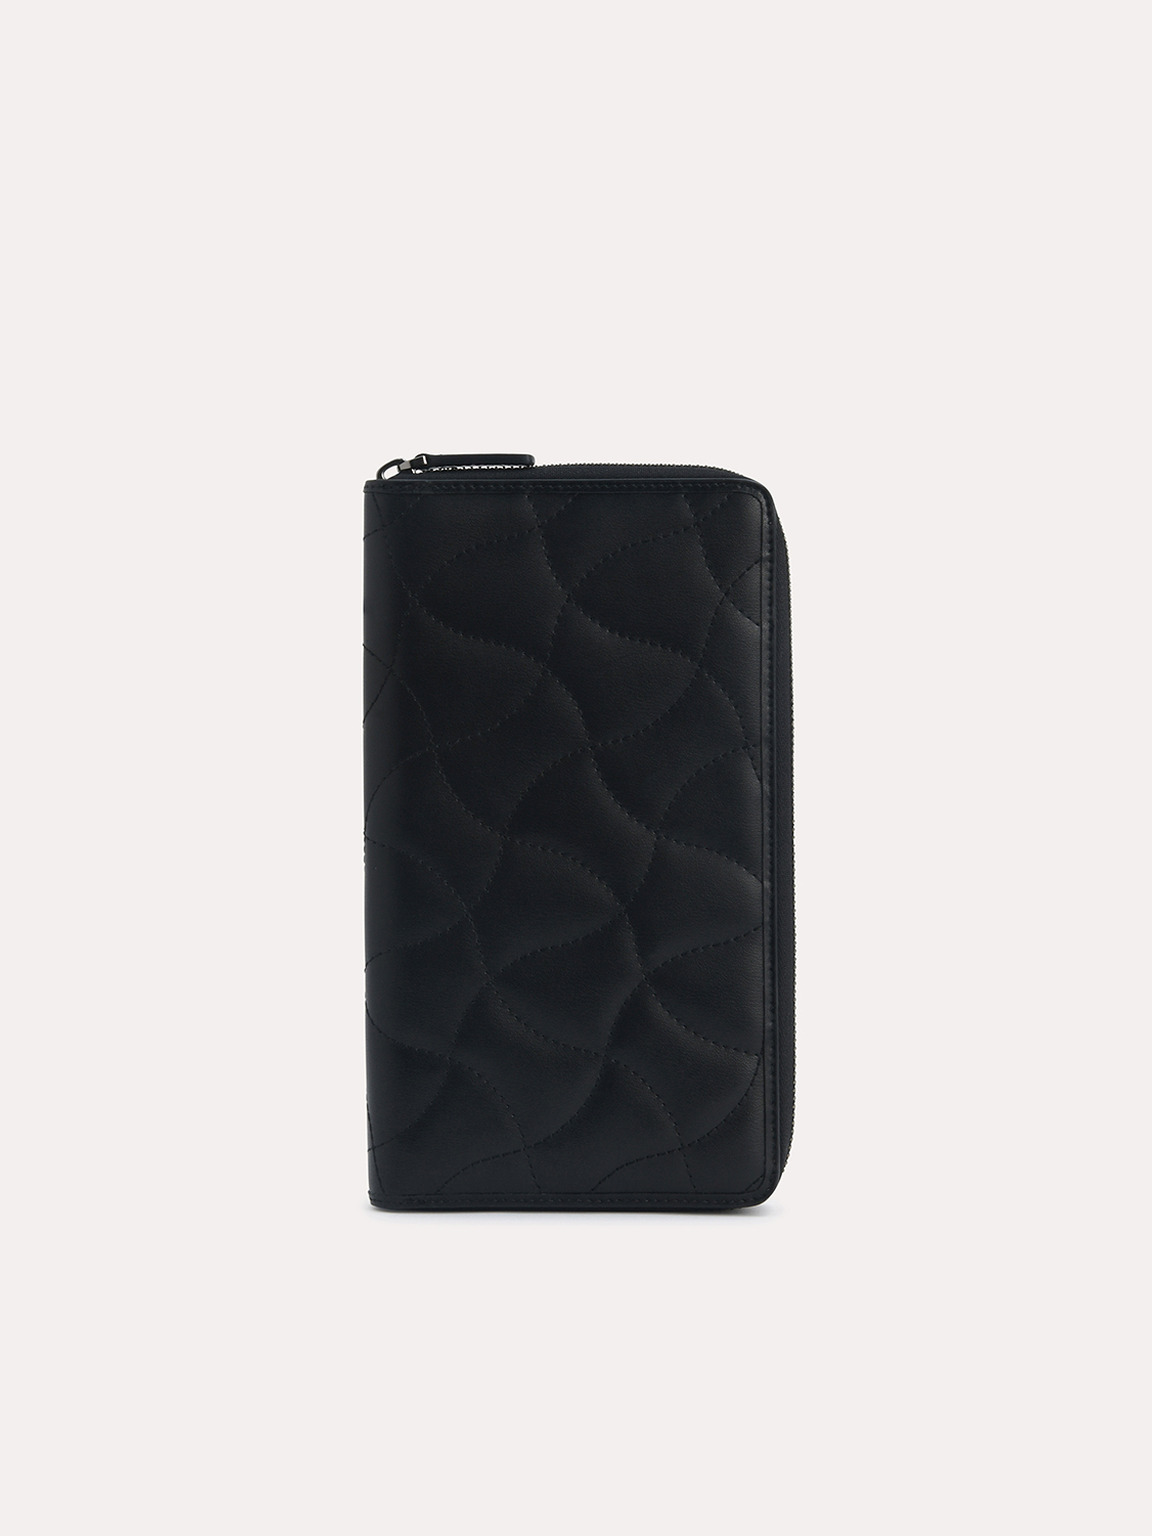 Quilted Leather Travel Organiser, Black